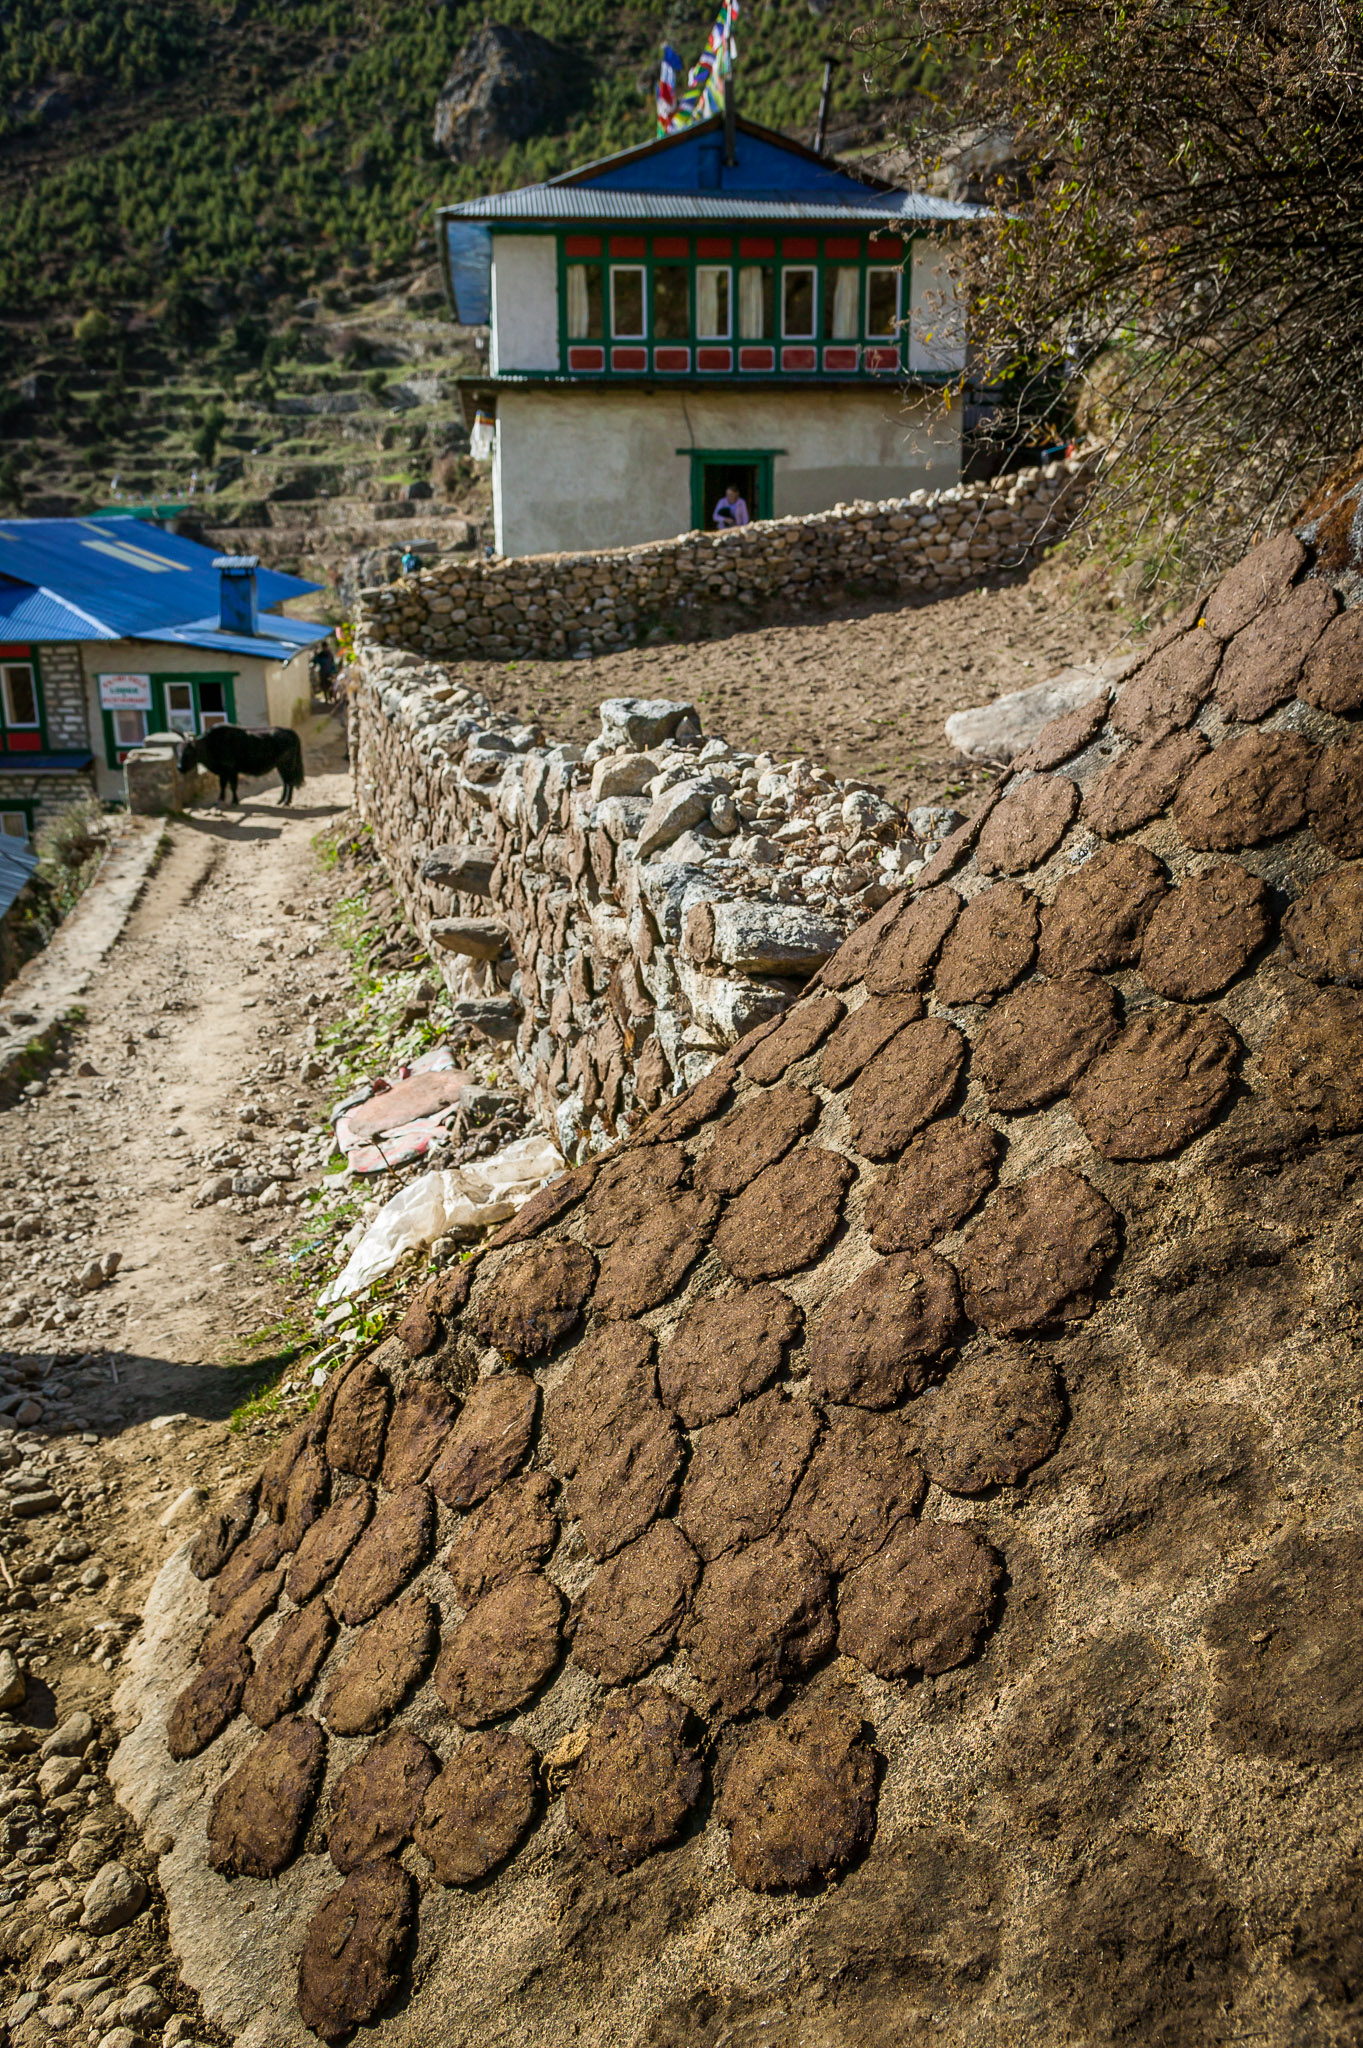 Drying stove fuel (Yak dung)